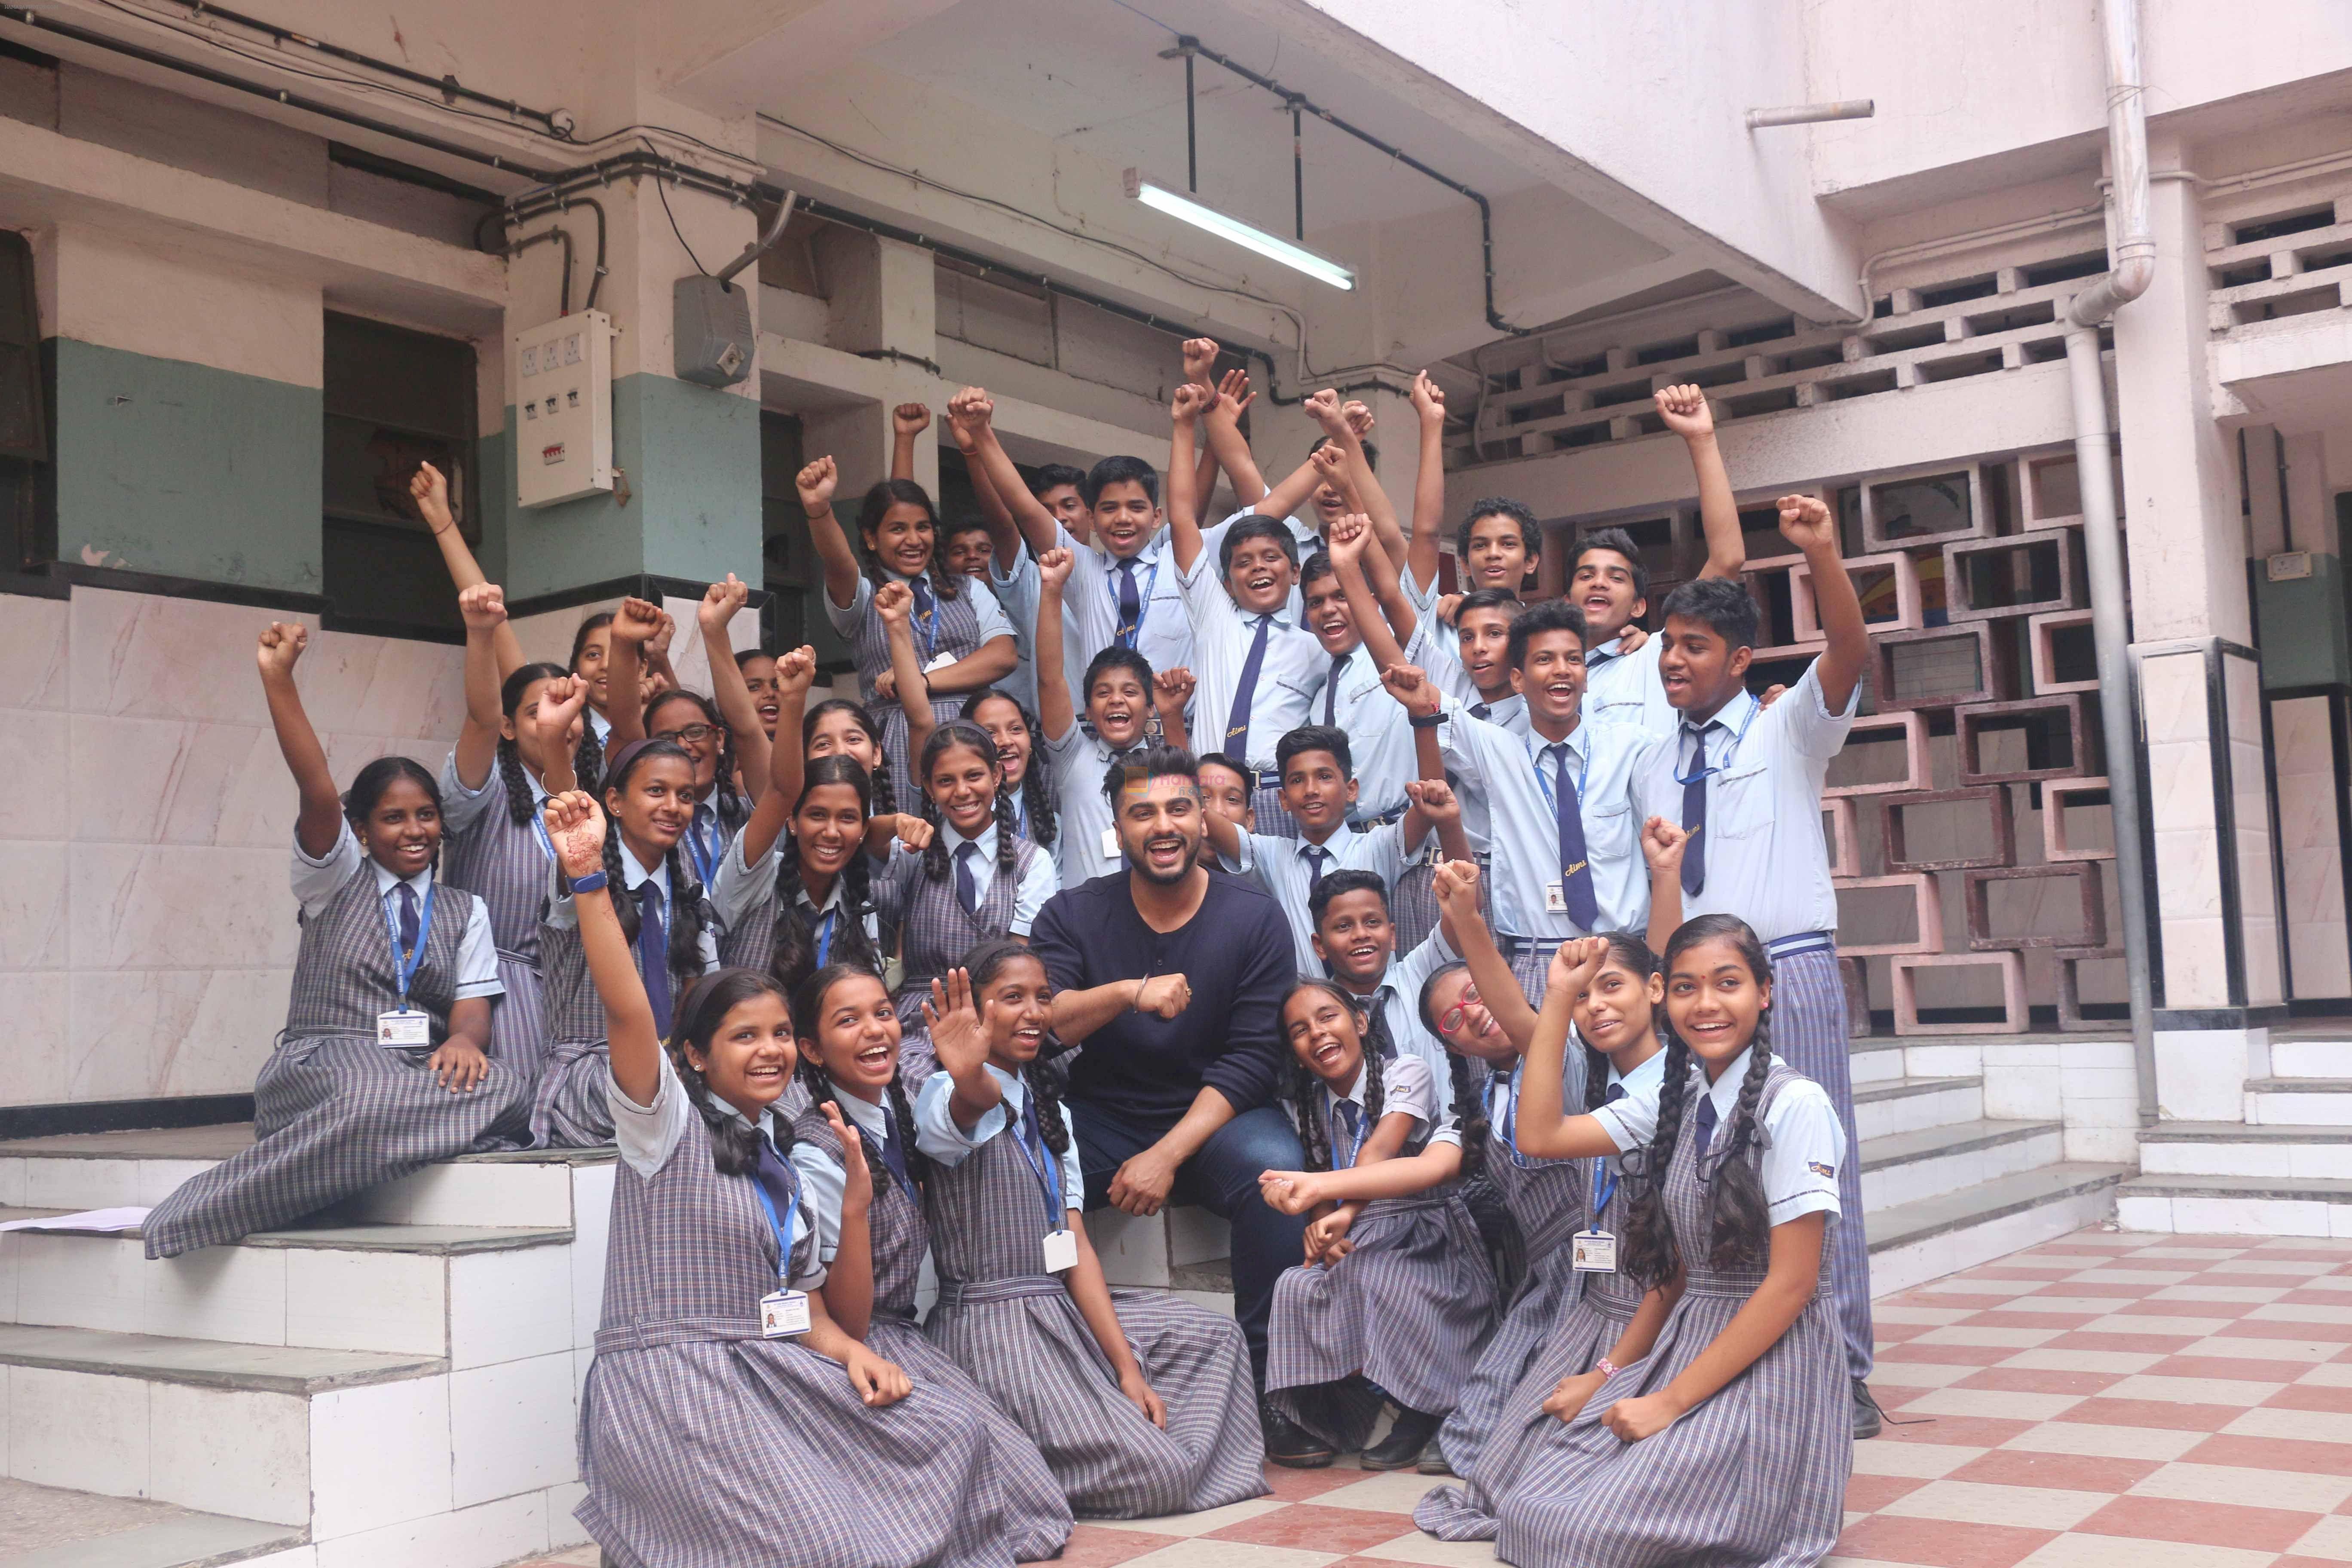 Arjun Kapoor, ambassador for Gender Equality of Girl Rising India Foundation shooting a campaign with 40 kids at Air India Modern School Kalina on 17th April 2018